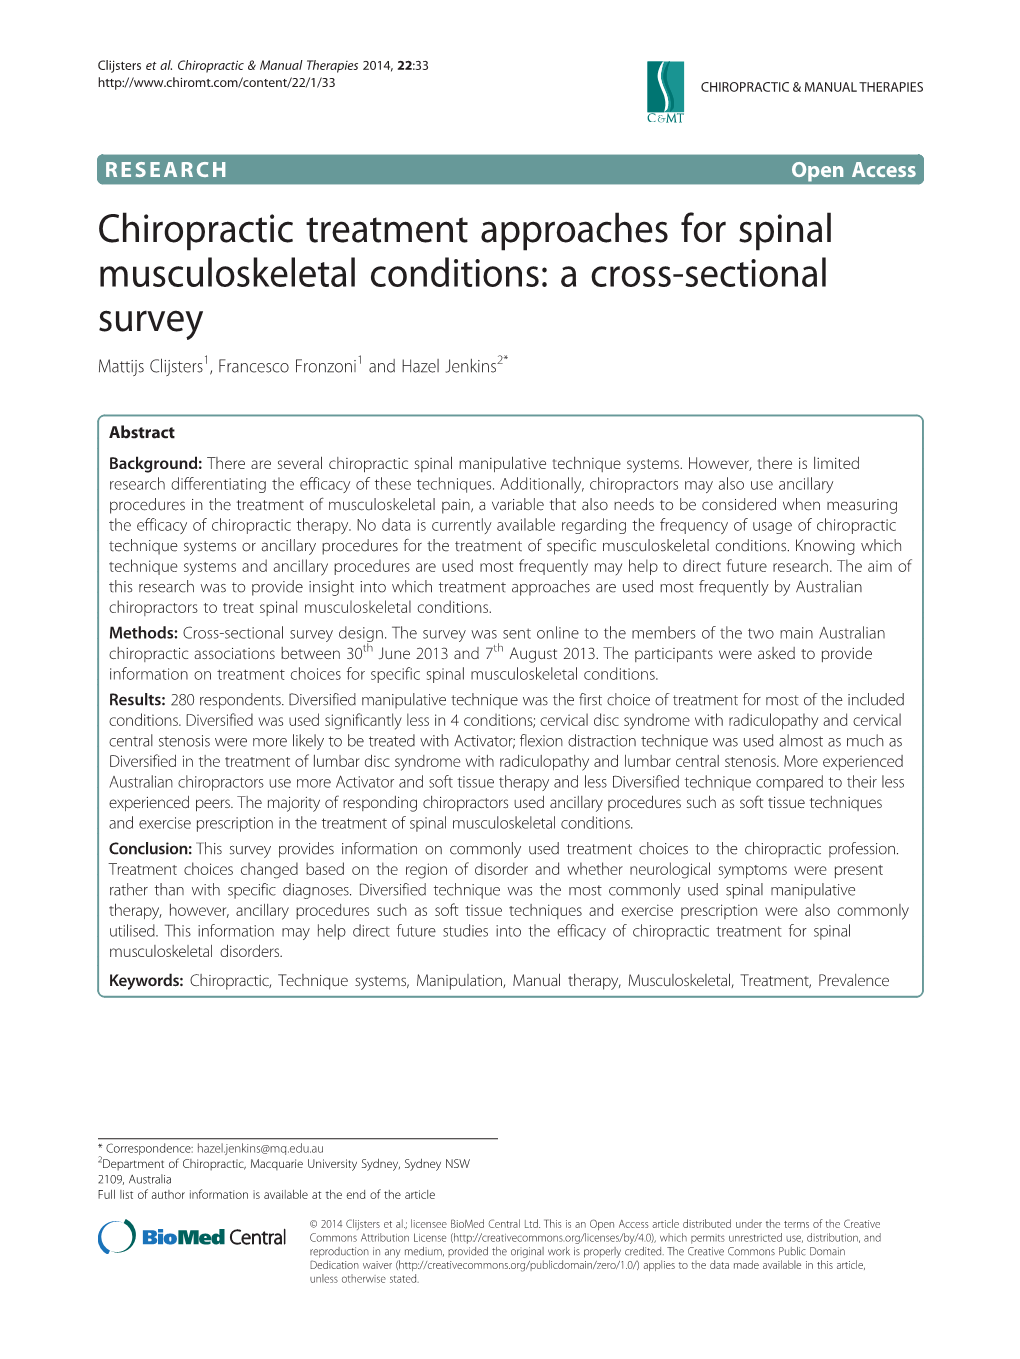 Chiropractic Treatment Approaches for Spinal Musculoskeletal Conditions: a Cross-Sectional Survey Mattijs Clijsters1, Francesco Fronzoni1 and Hazel Jenkins2*